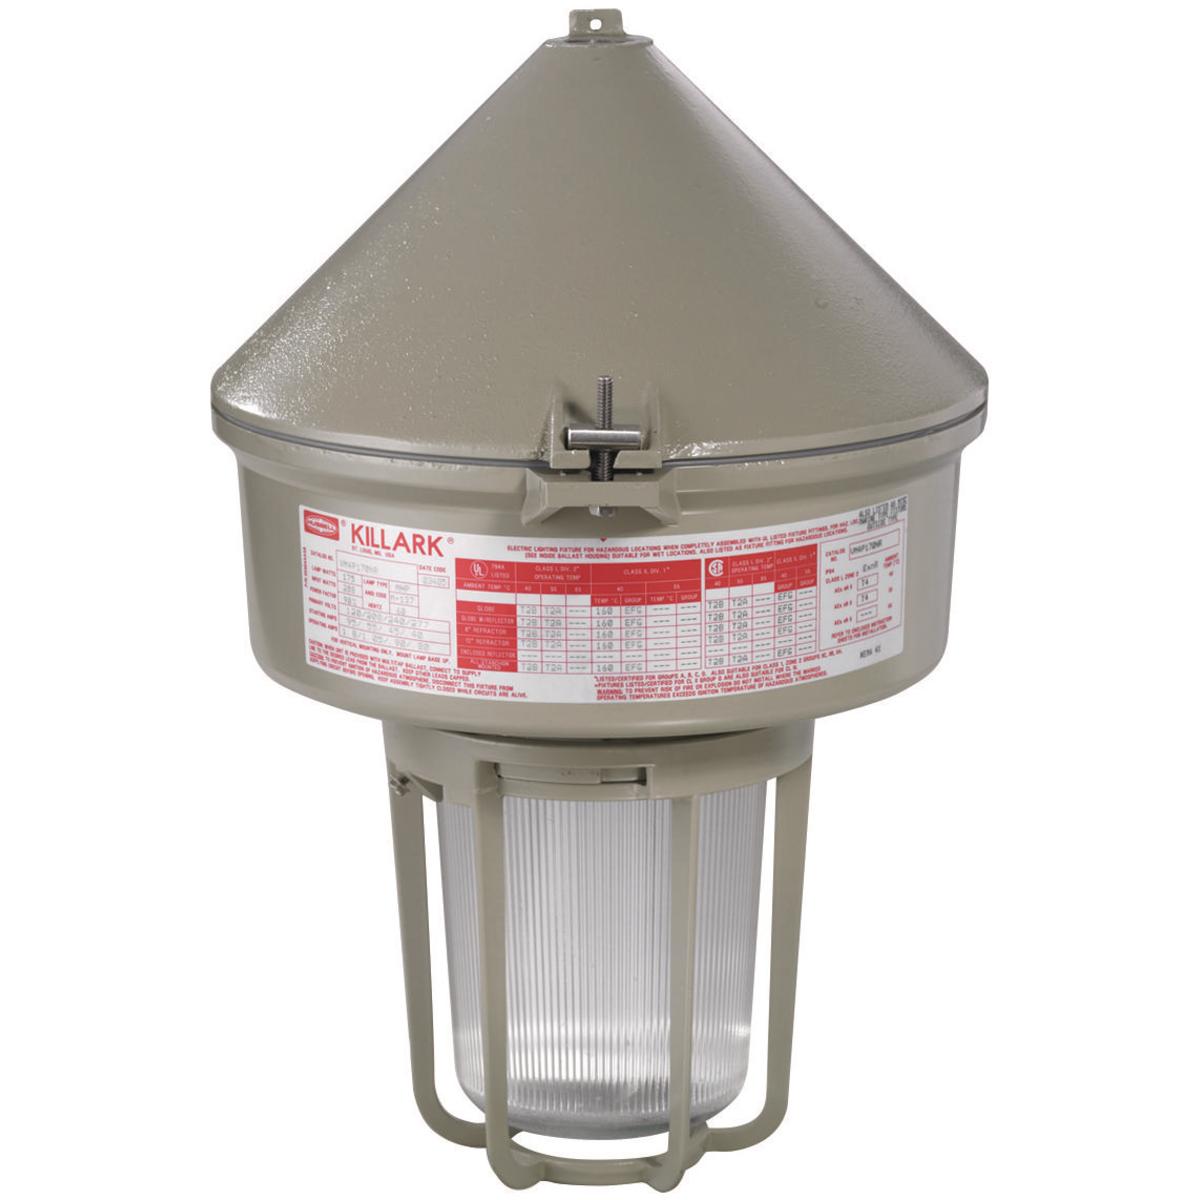 Hubbell VM3H105C2R5G VM3 Series - 100W Metal Halide 480V - 3/4" Cone Top - Type V Glass Refractor and Guard  ; Ballast tank and splice box – corrosion resistant copper-free aluminum alloy with baked powder epoxy/polyester finish, electrostatically applied for complete, unifor